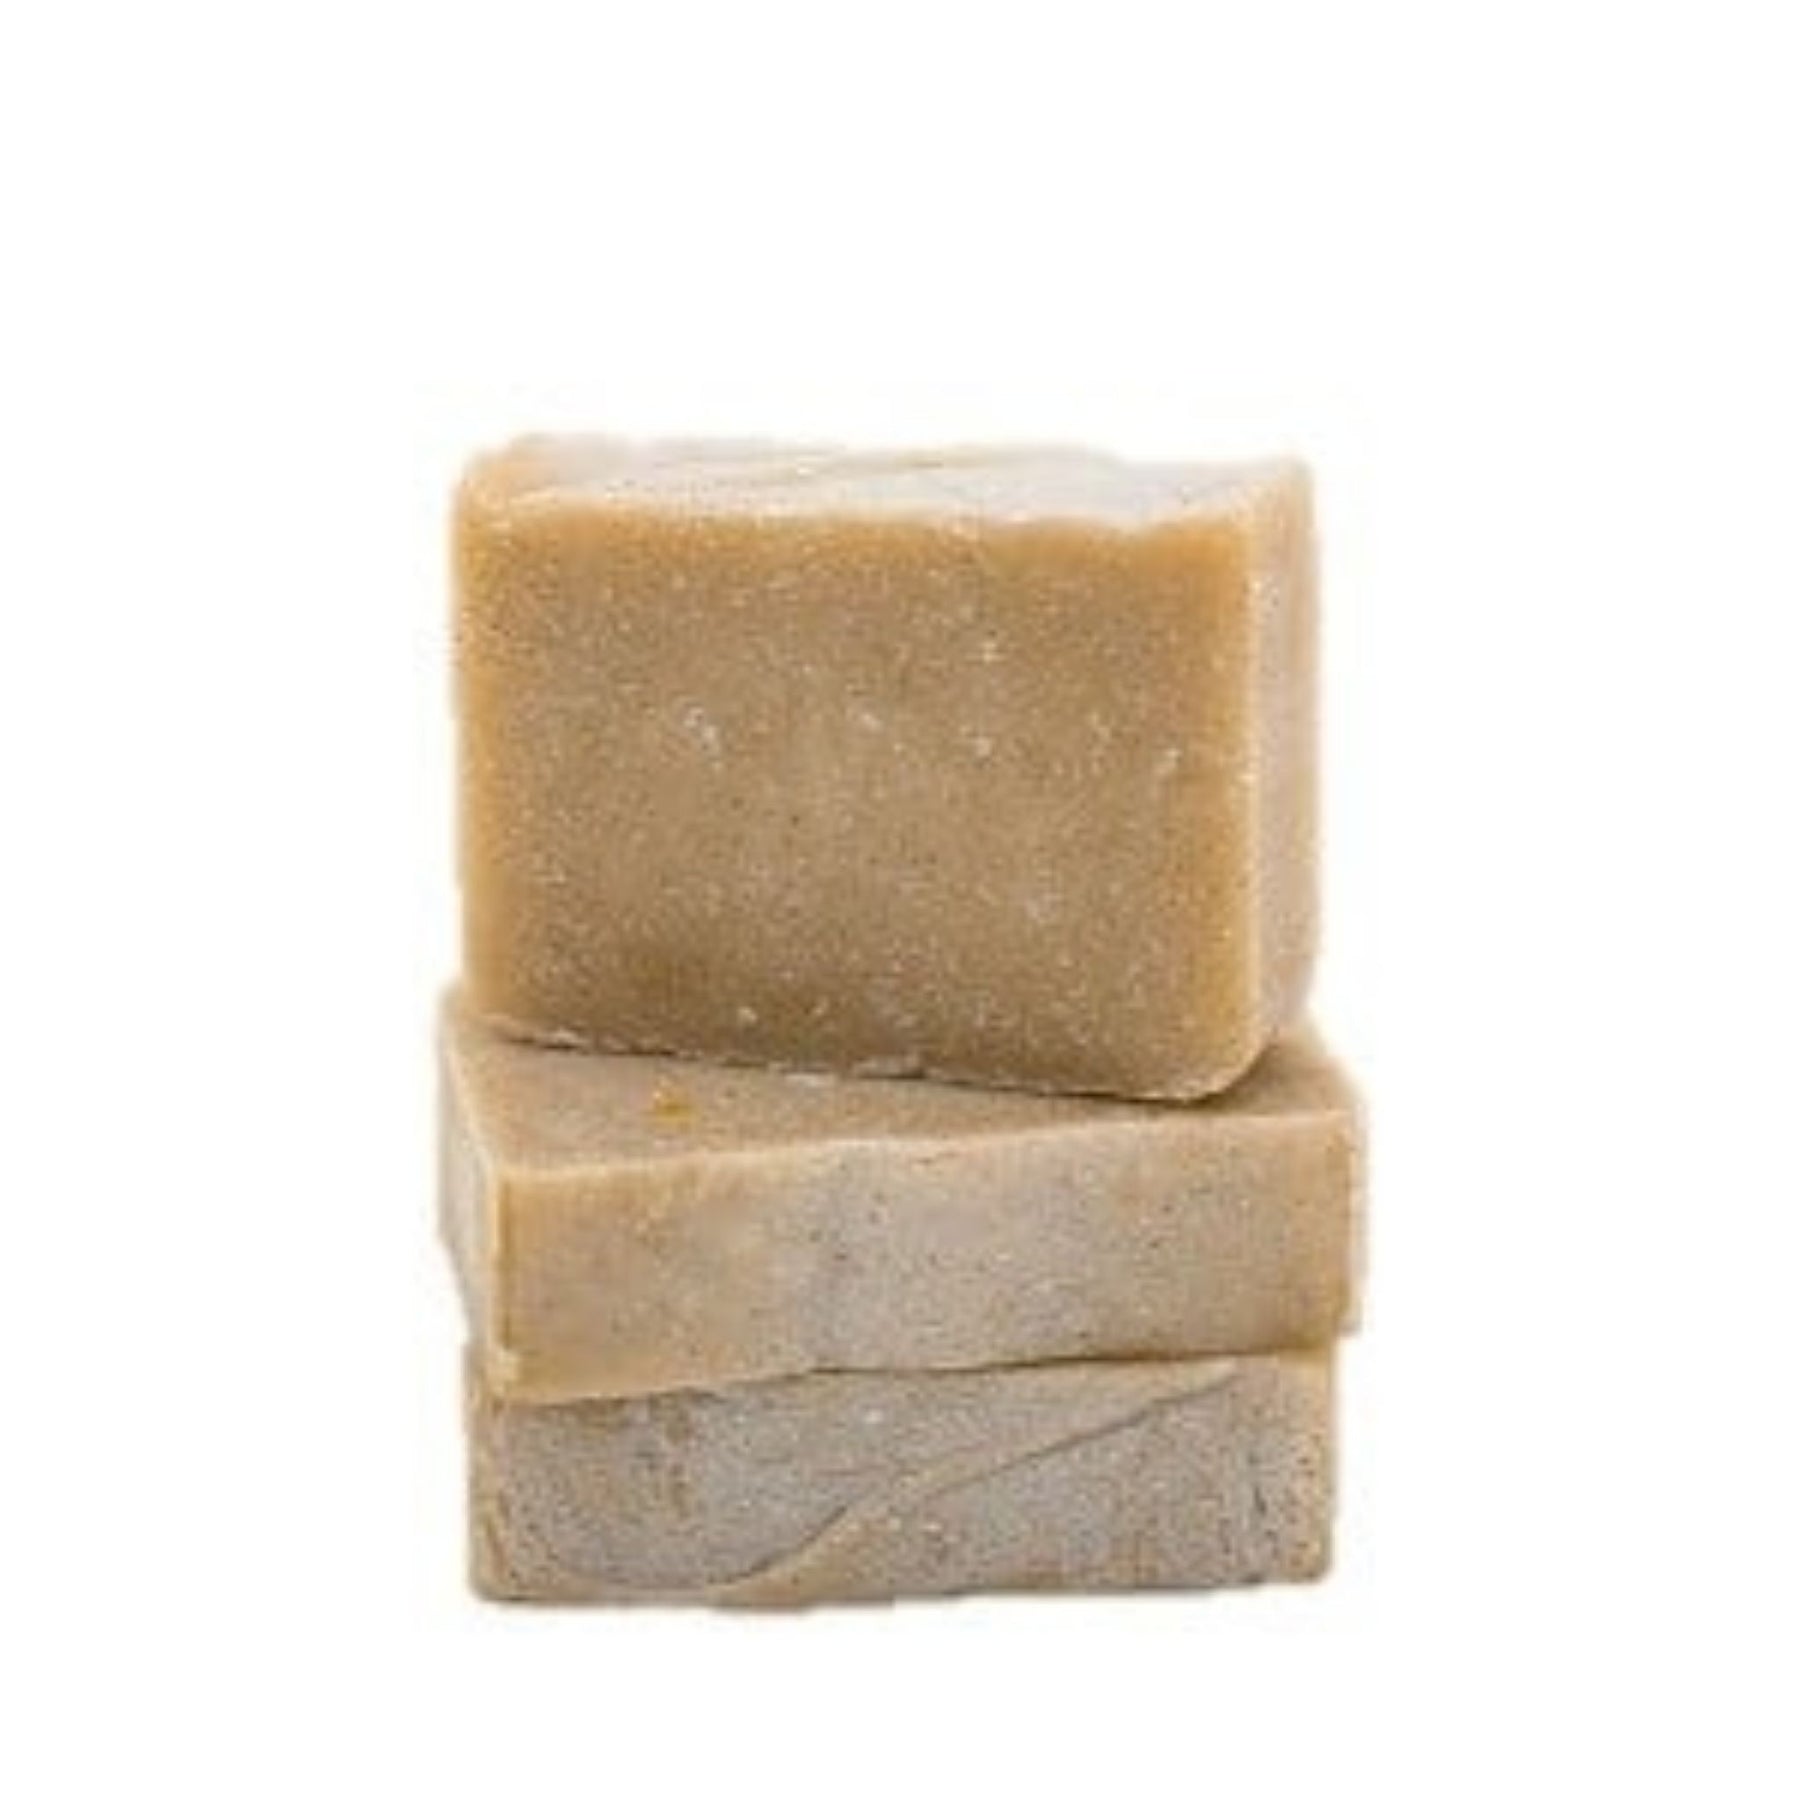 Stack of Man-oh-man, Cinna-man bars.  Handcrafted, all natural bar soap by Moxxie